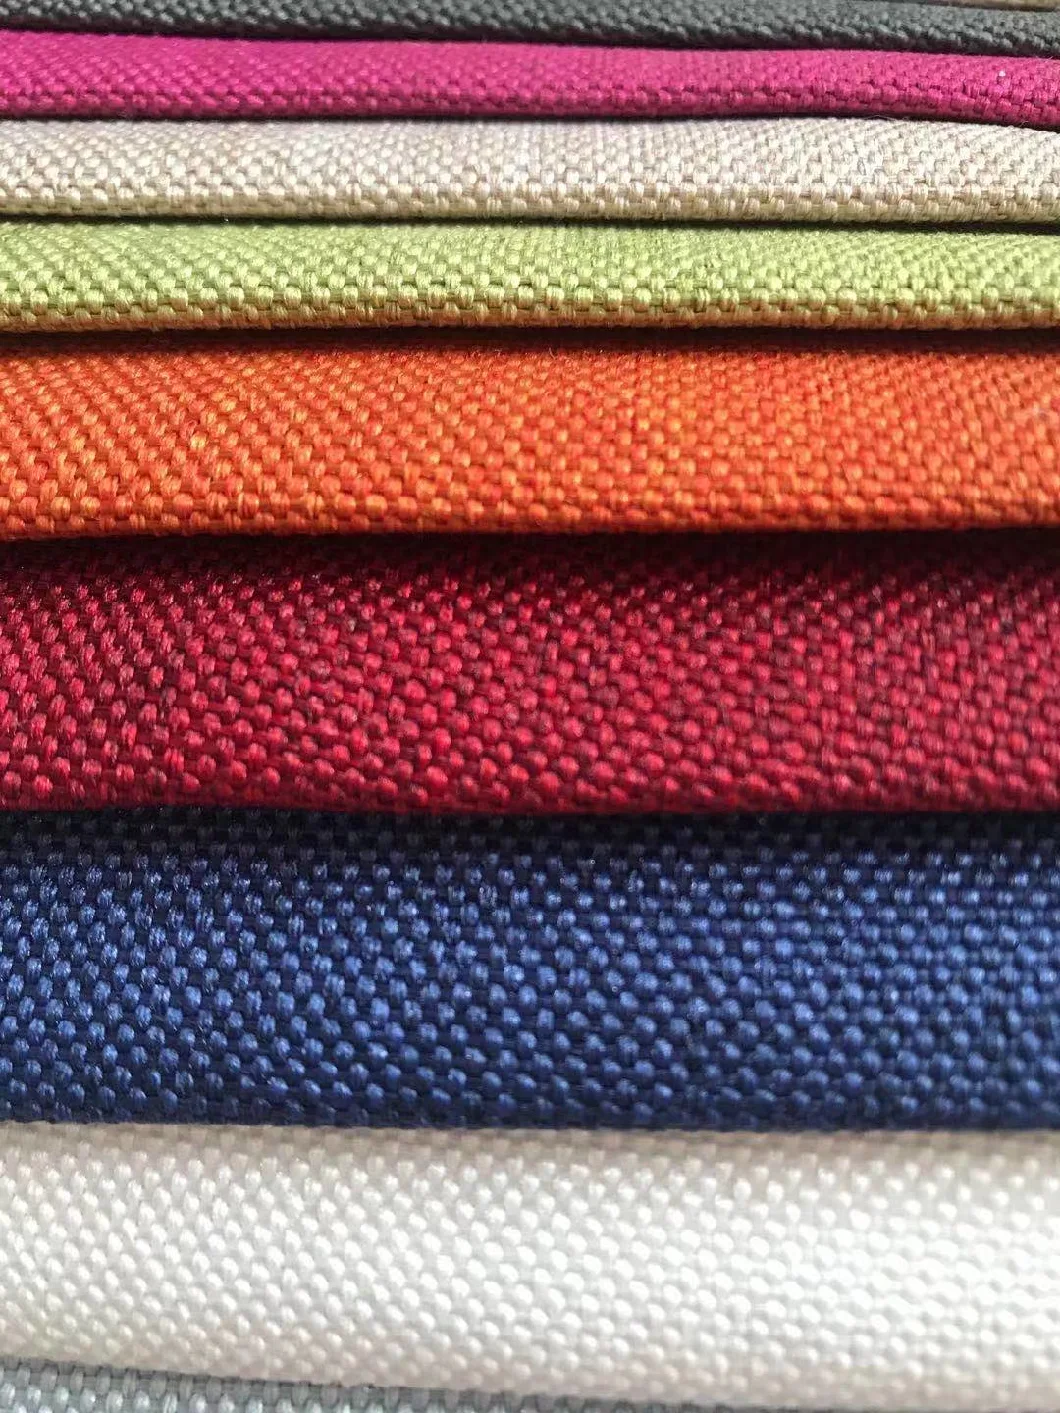 100% Polyester Sofa Fabric Upholstery Linen Look Fabric for Seat Cover